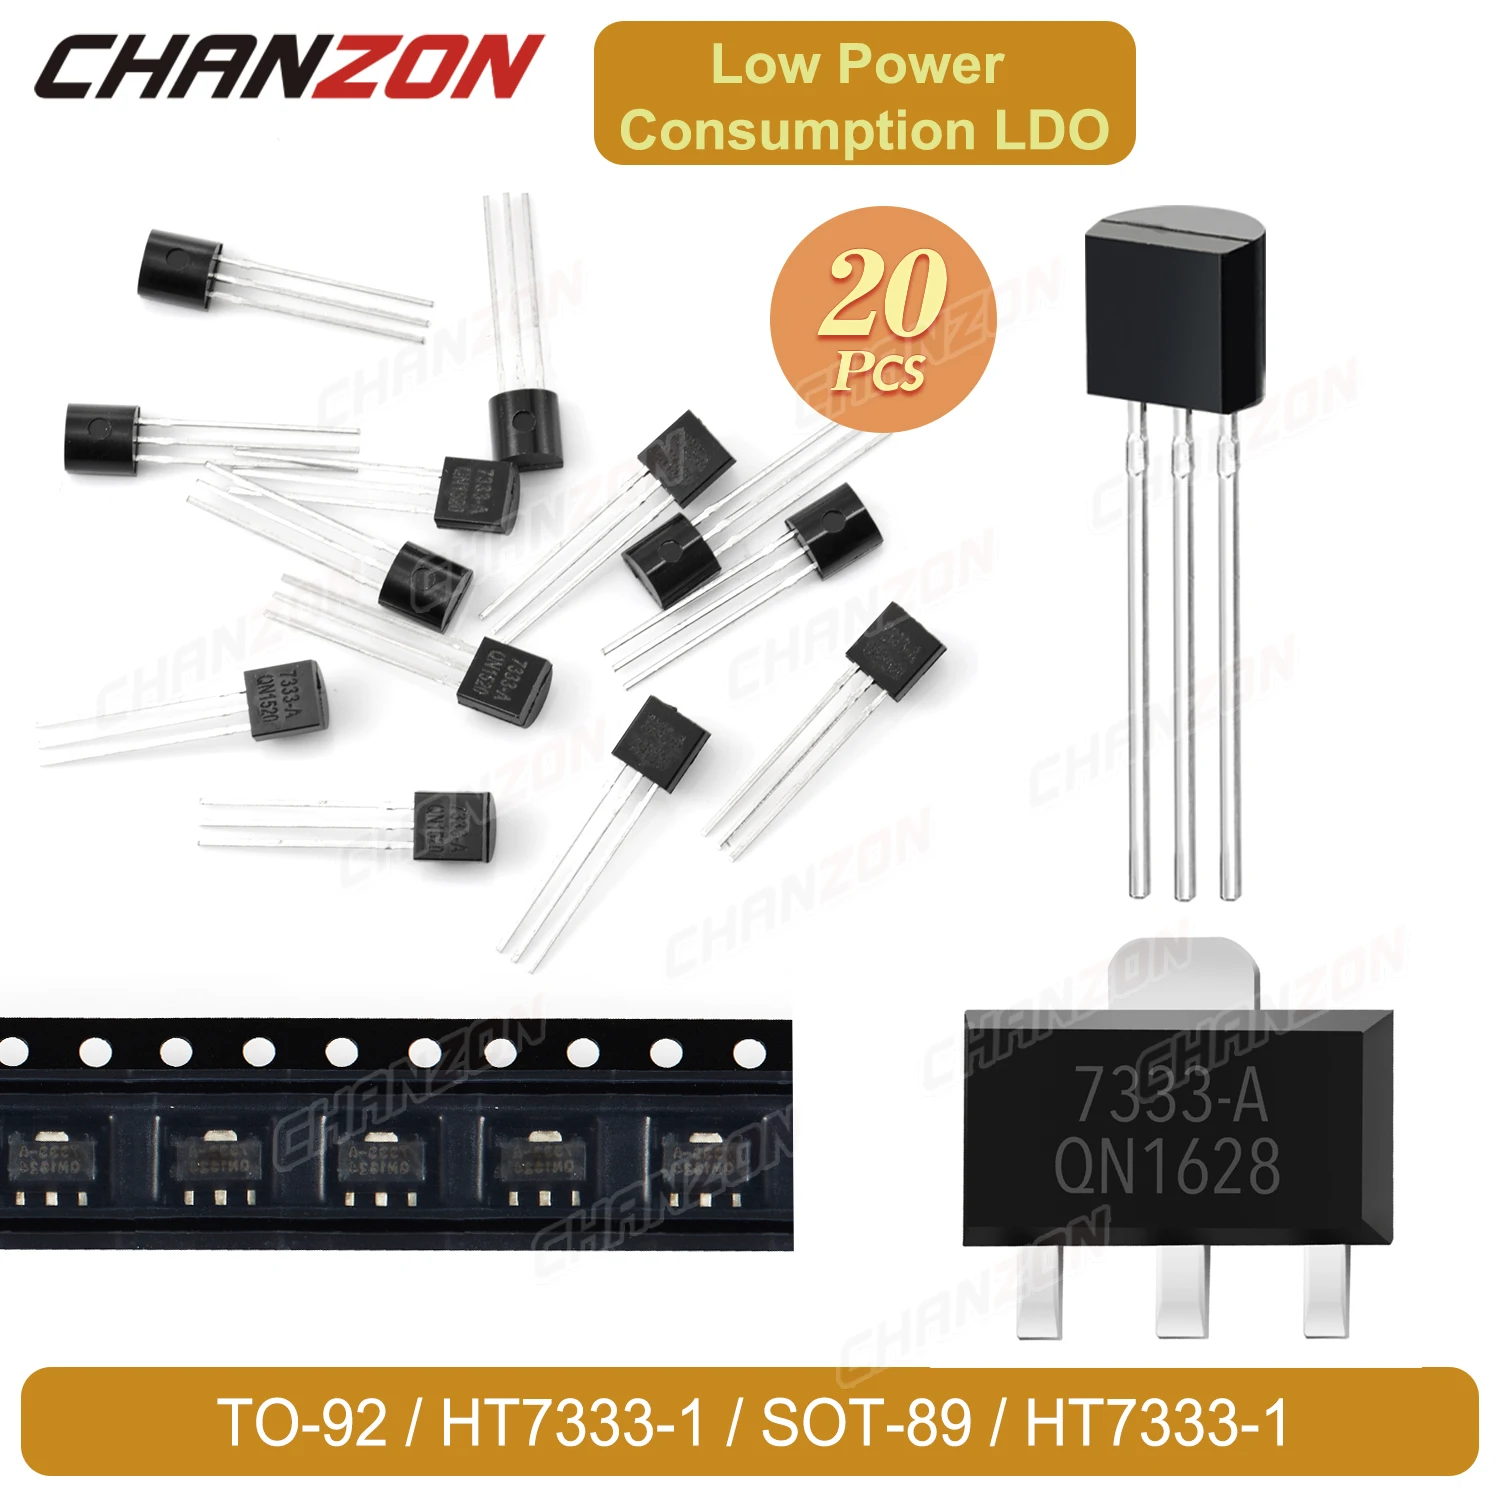 10PCS/lots TO-92 SOT-89 HT7333-1 Low Power Consumption LDO Triode Tube Transistor HT7333 Bipolar Junction Integrated Circuit